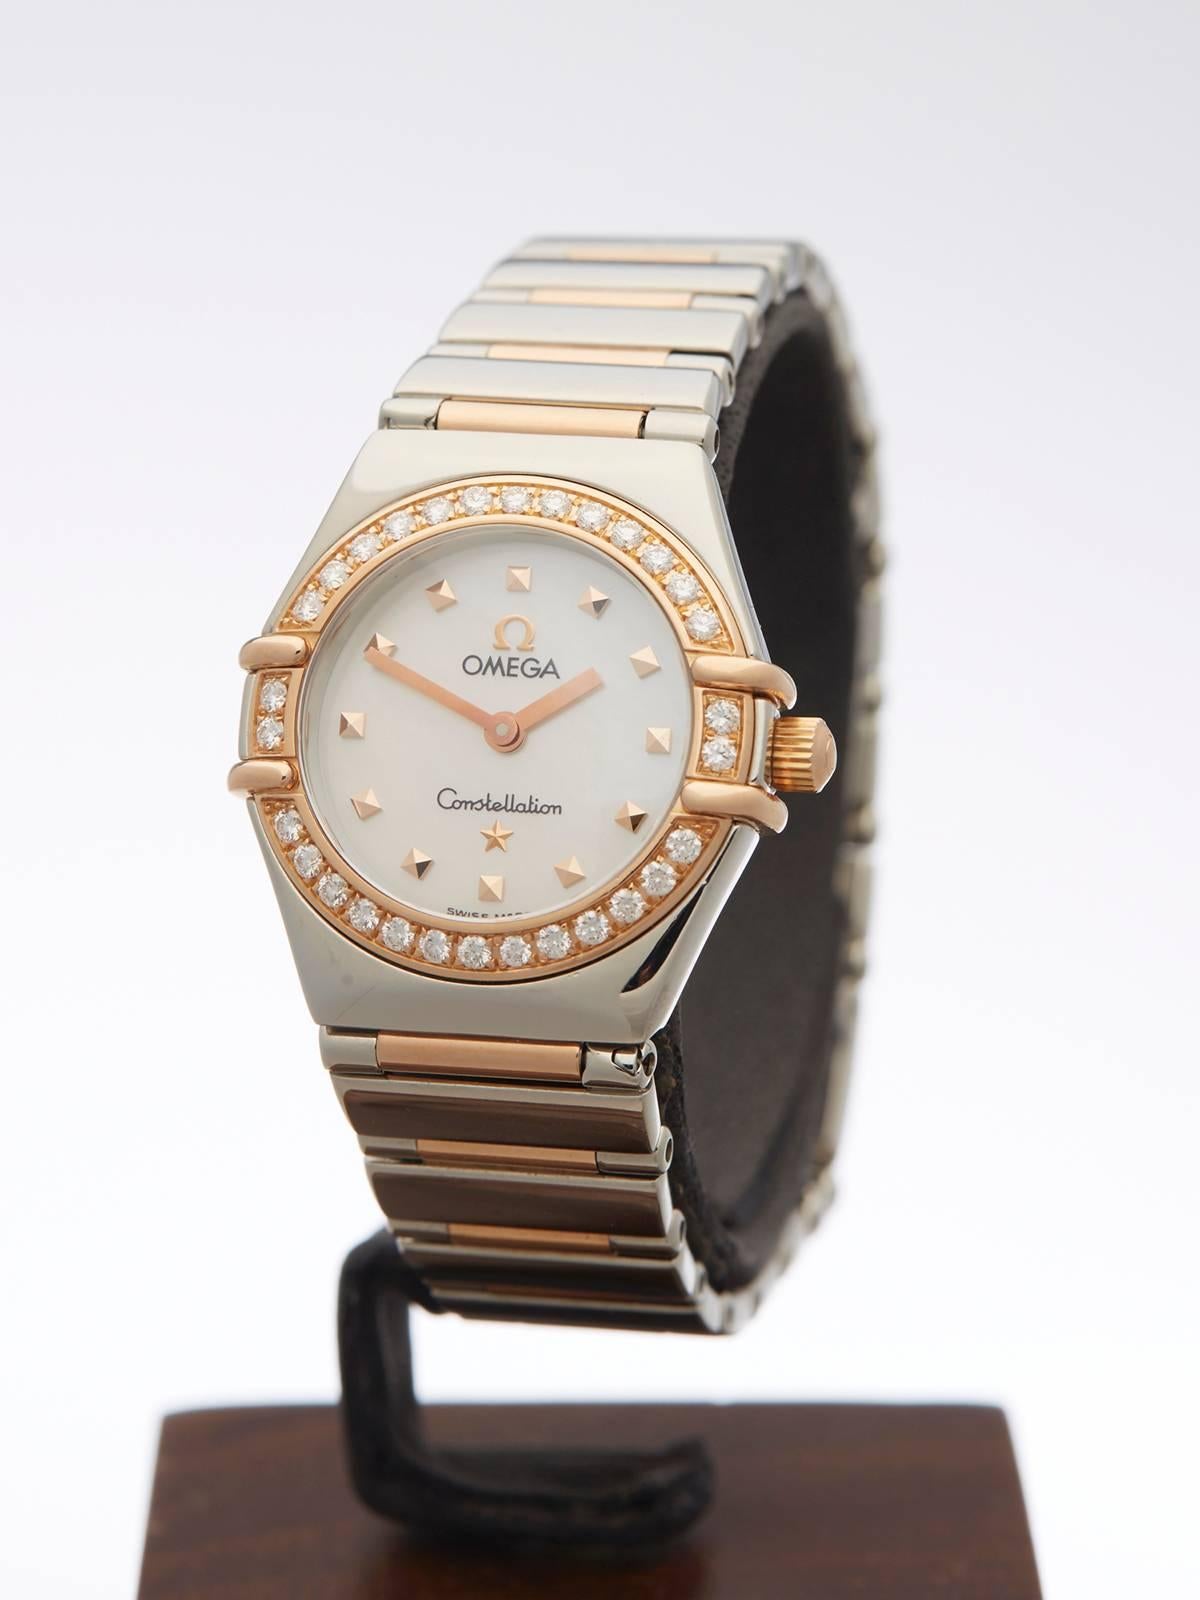 REF	W3015
MODEL NUMBER	13687100
SERIAL NUMBER	575*****
CONDITION	9 - Excellent condition
GENDER	Ladies
AGE	24th December 2002
CASE DIAMETER	23 mm
CASE SIZE	22.5mm
BOX & PAPERS	Box, manuals & guarantee
MOVEMENT	Automatic
CASE	Stainless